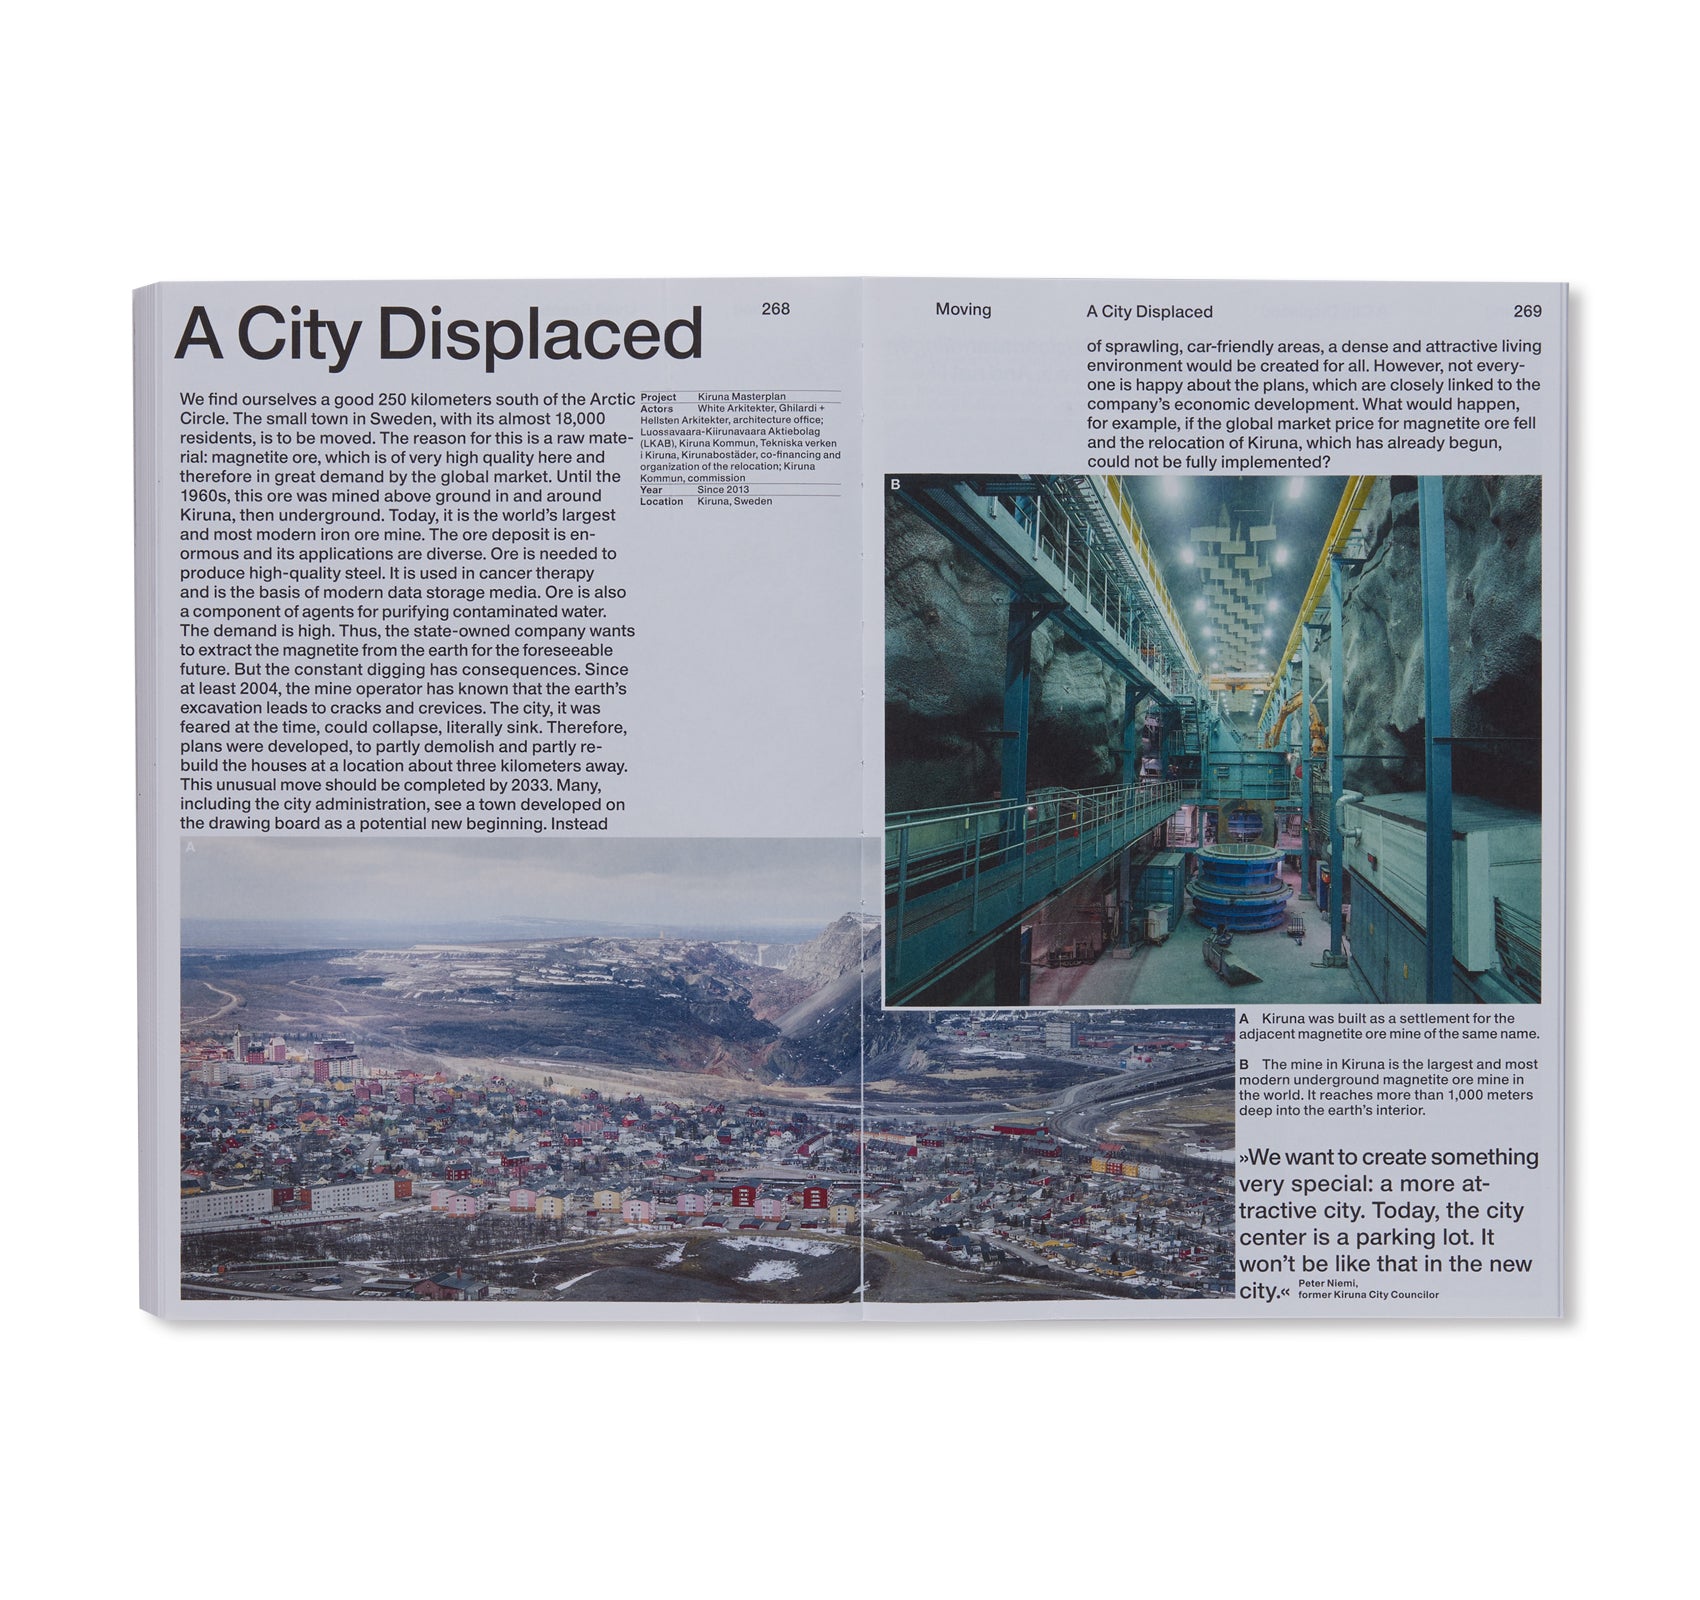 LIVING THE CITY OF CITIES, PEOPLE AND STORIES by Lukas Feireiss and Tatjana Schneider